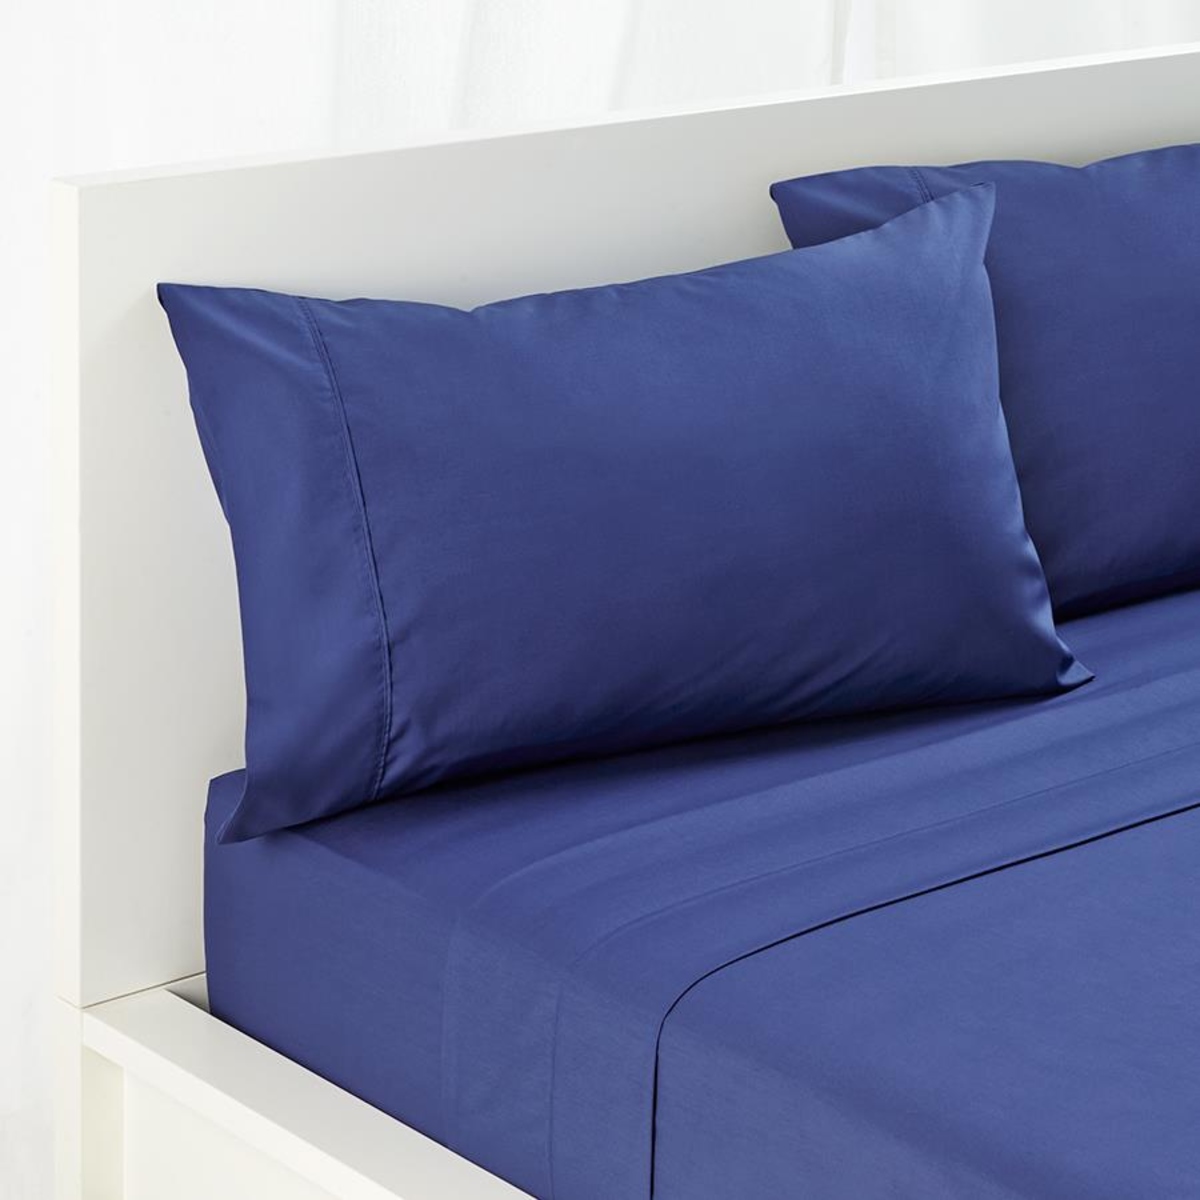 180 Thread Count Sheet Set - Double Bed, Mid Blue